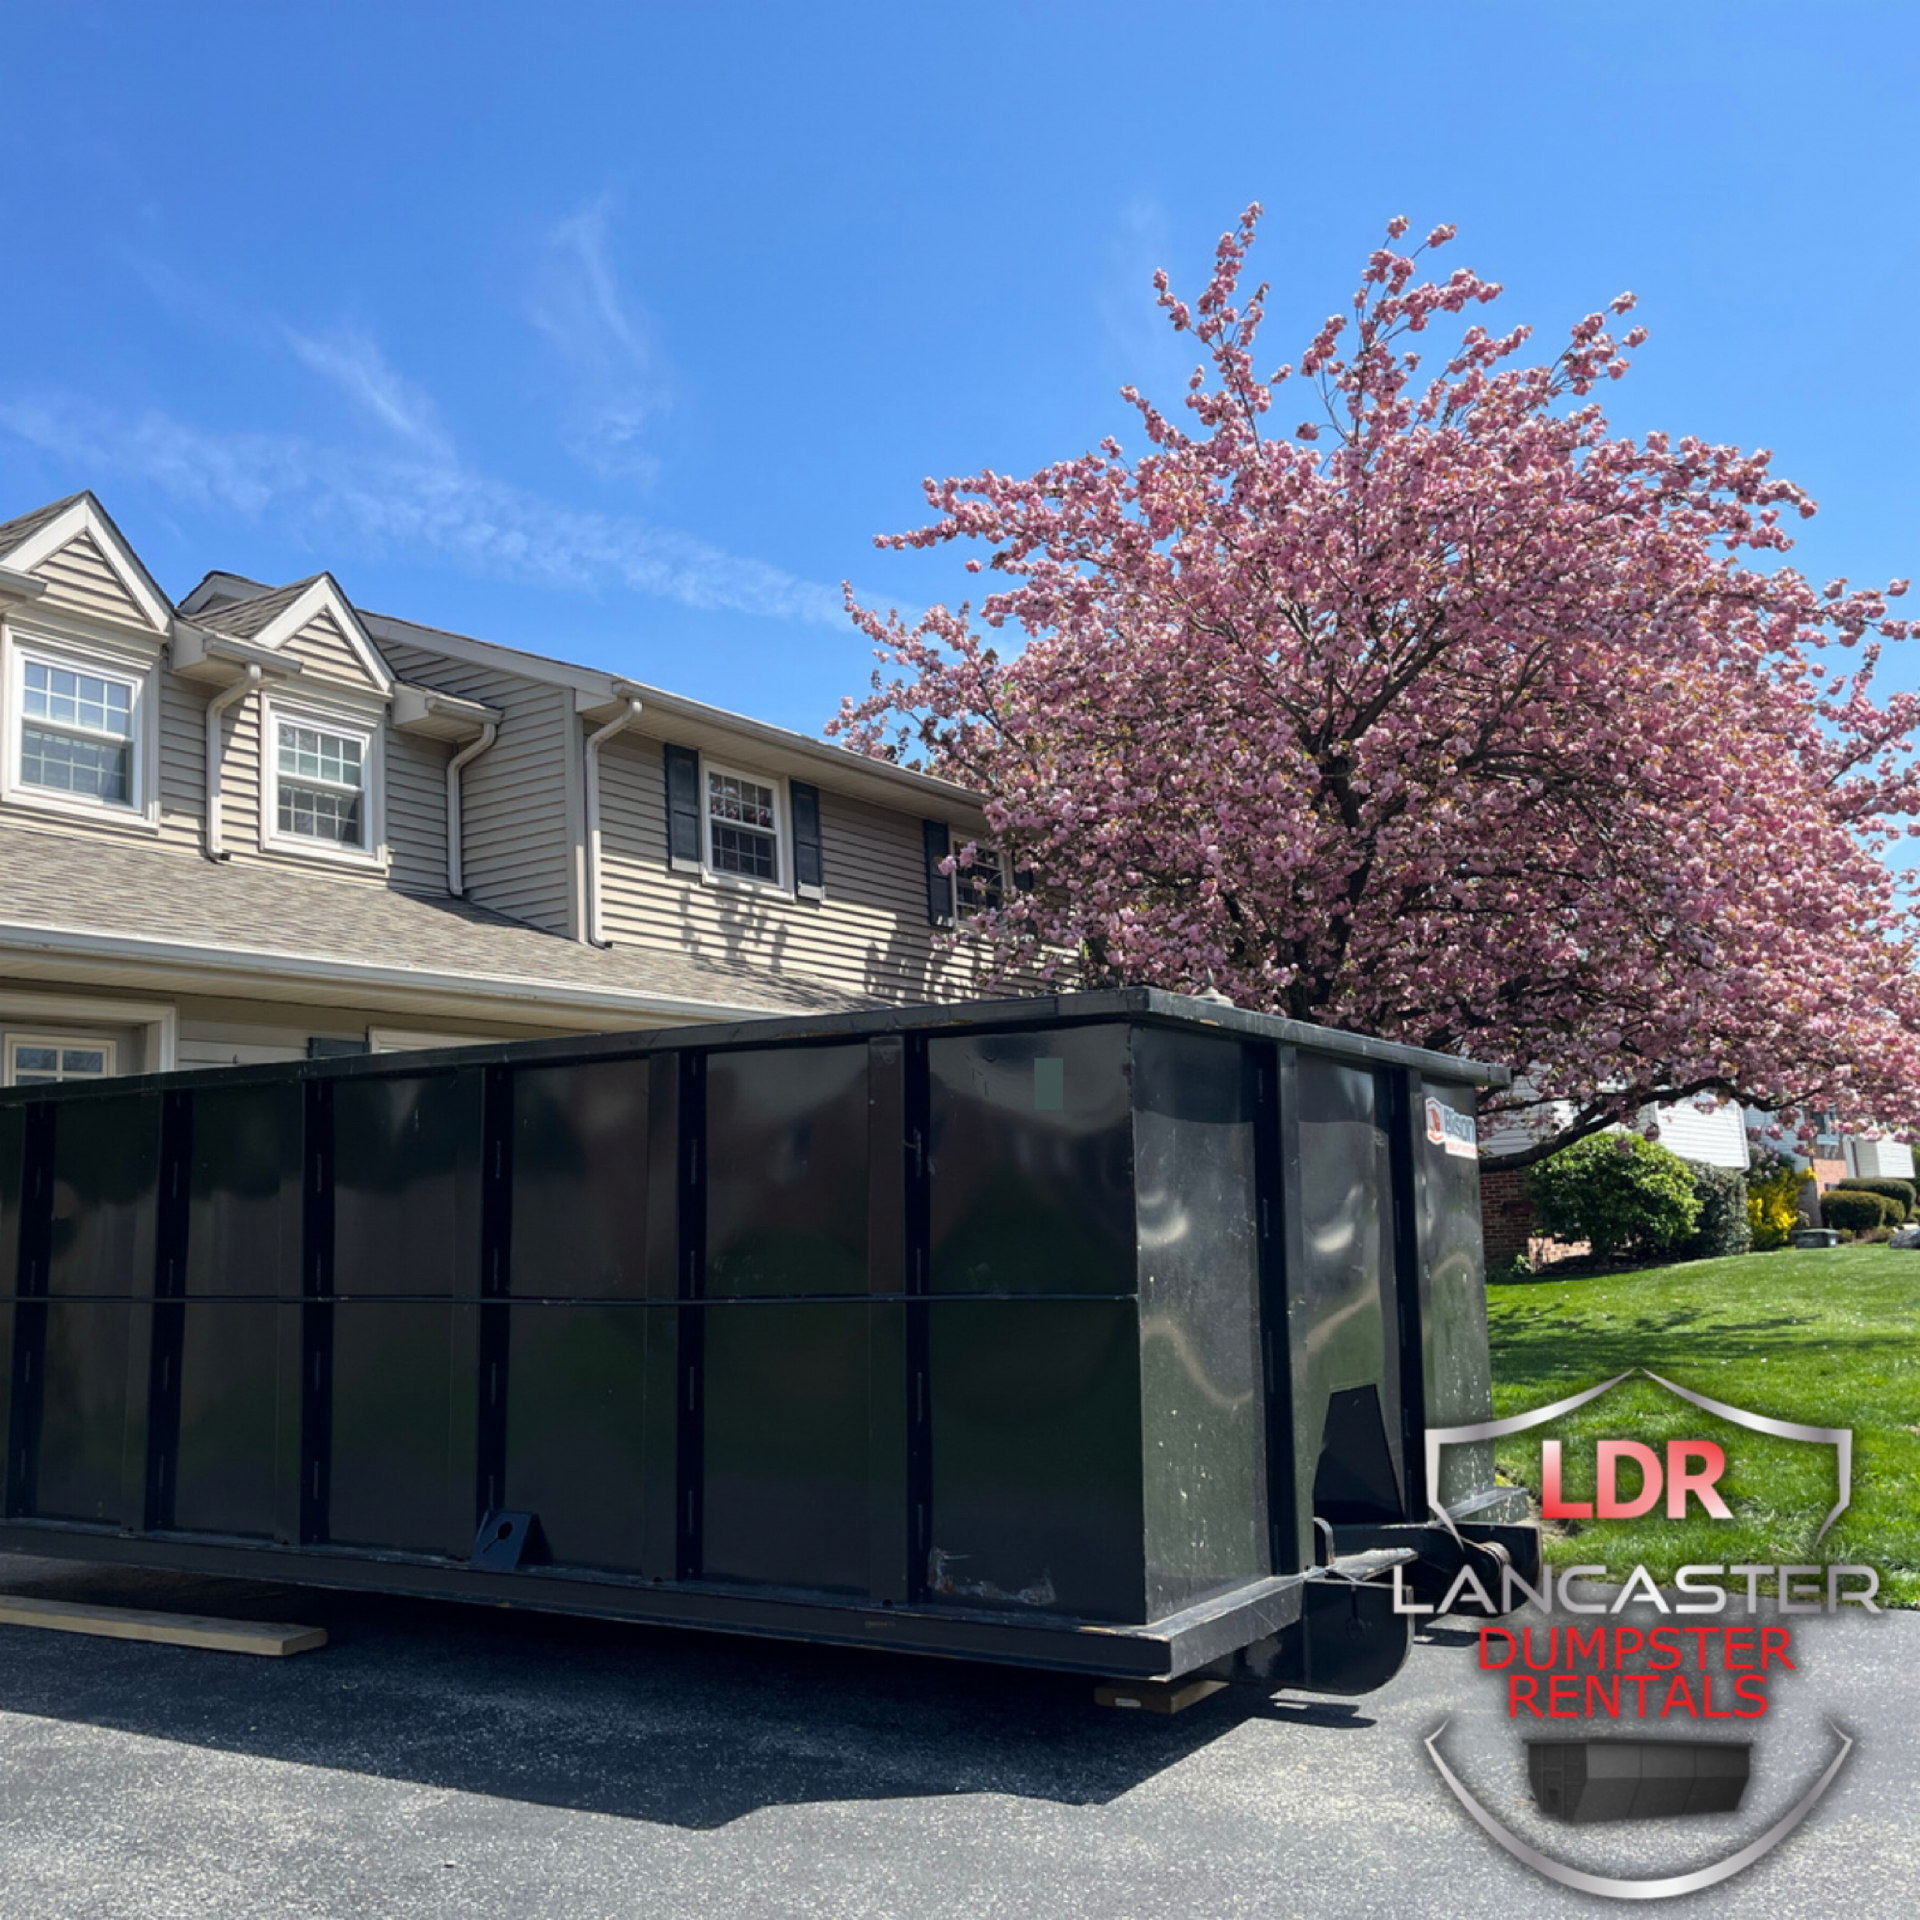 East Donegal Pa Dumpster Rentals